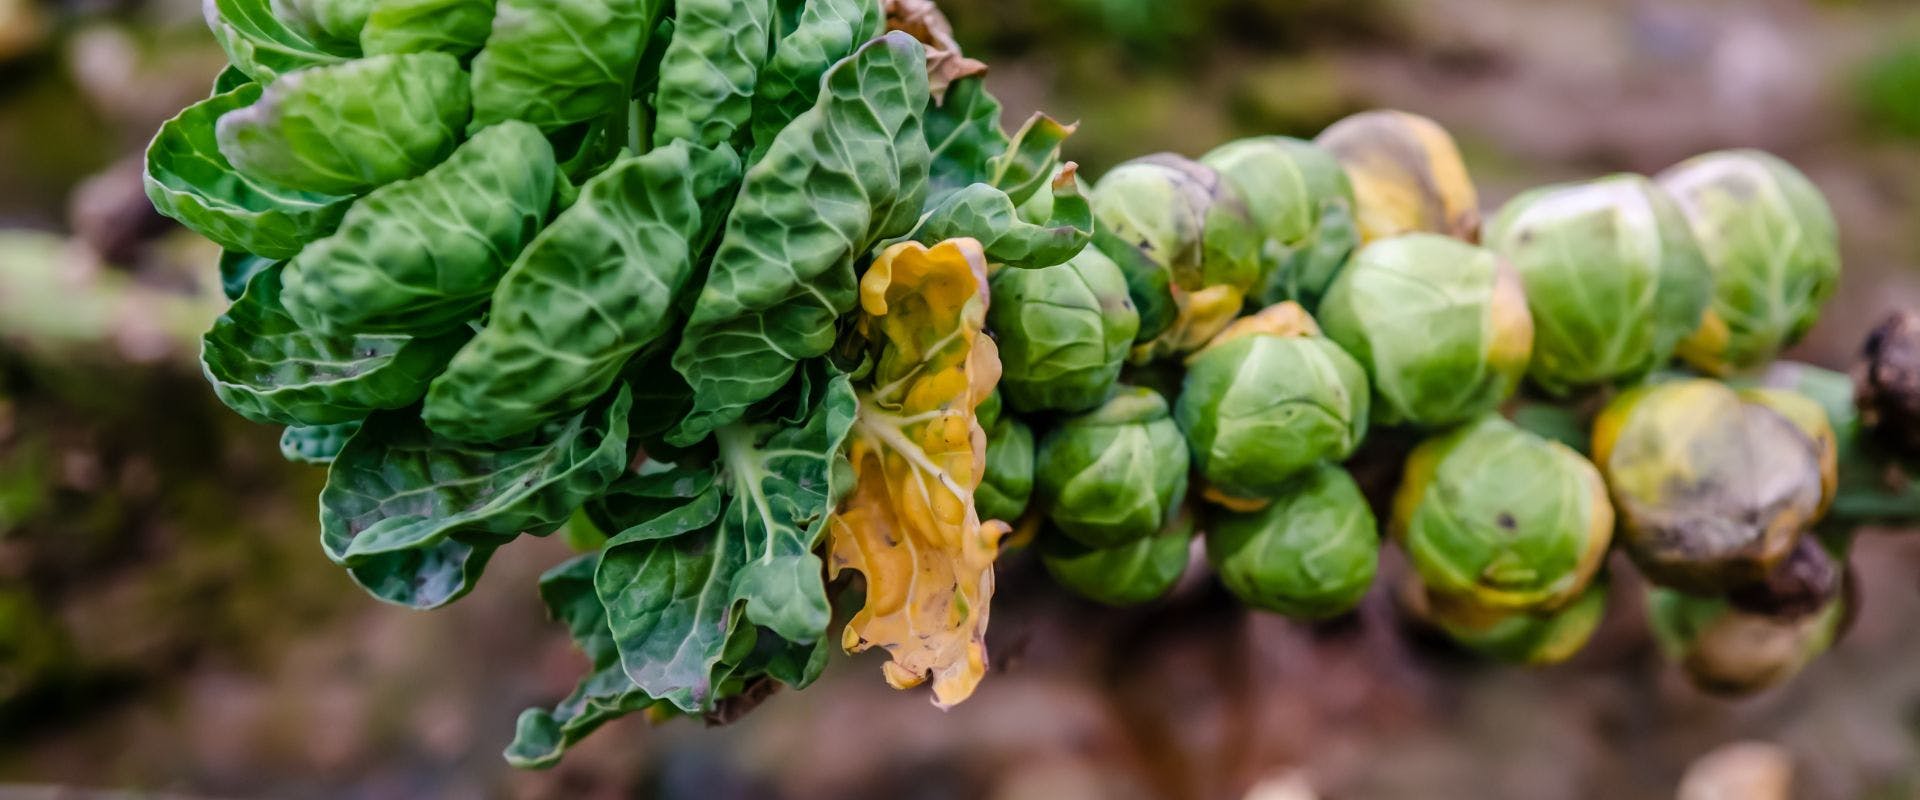 Brussels sprouts growing outdoors